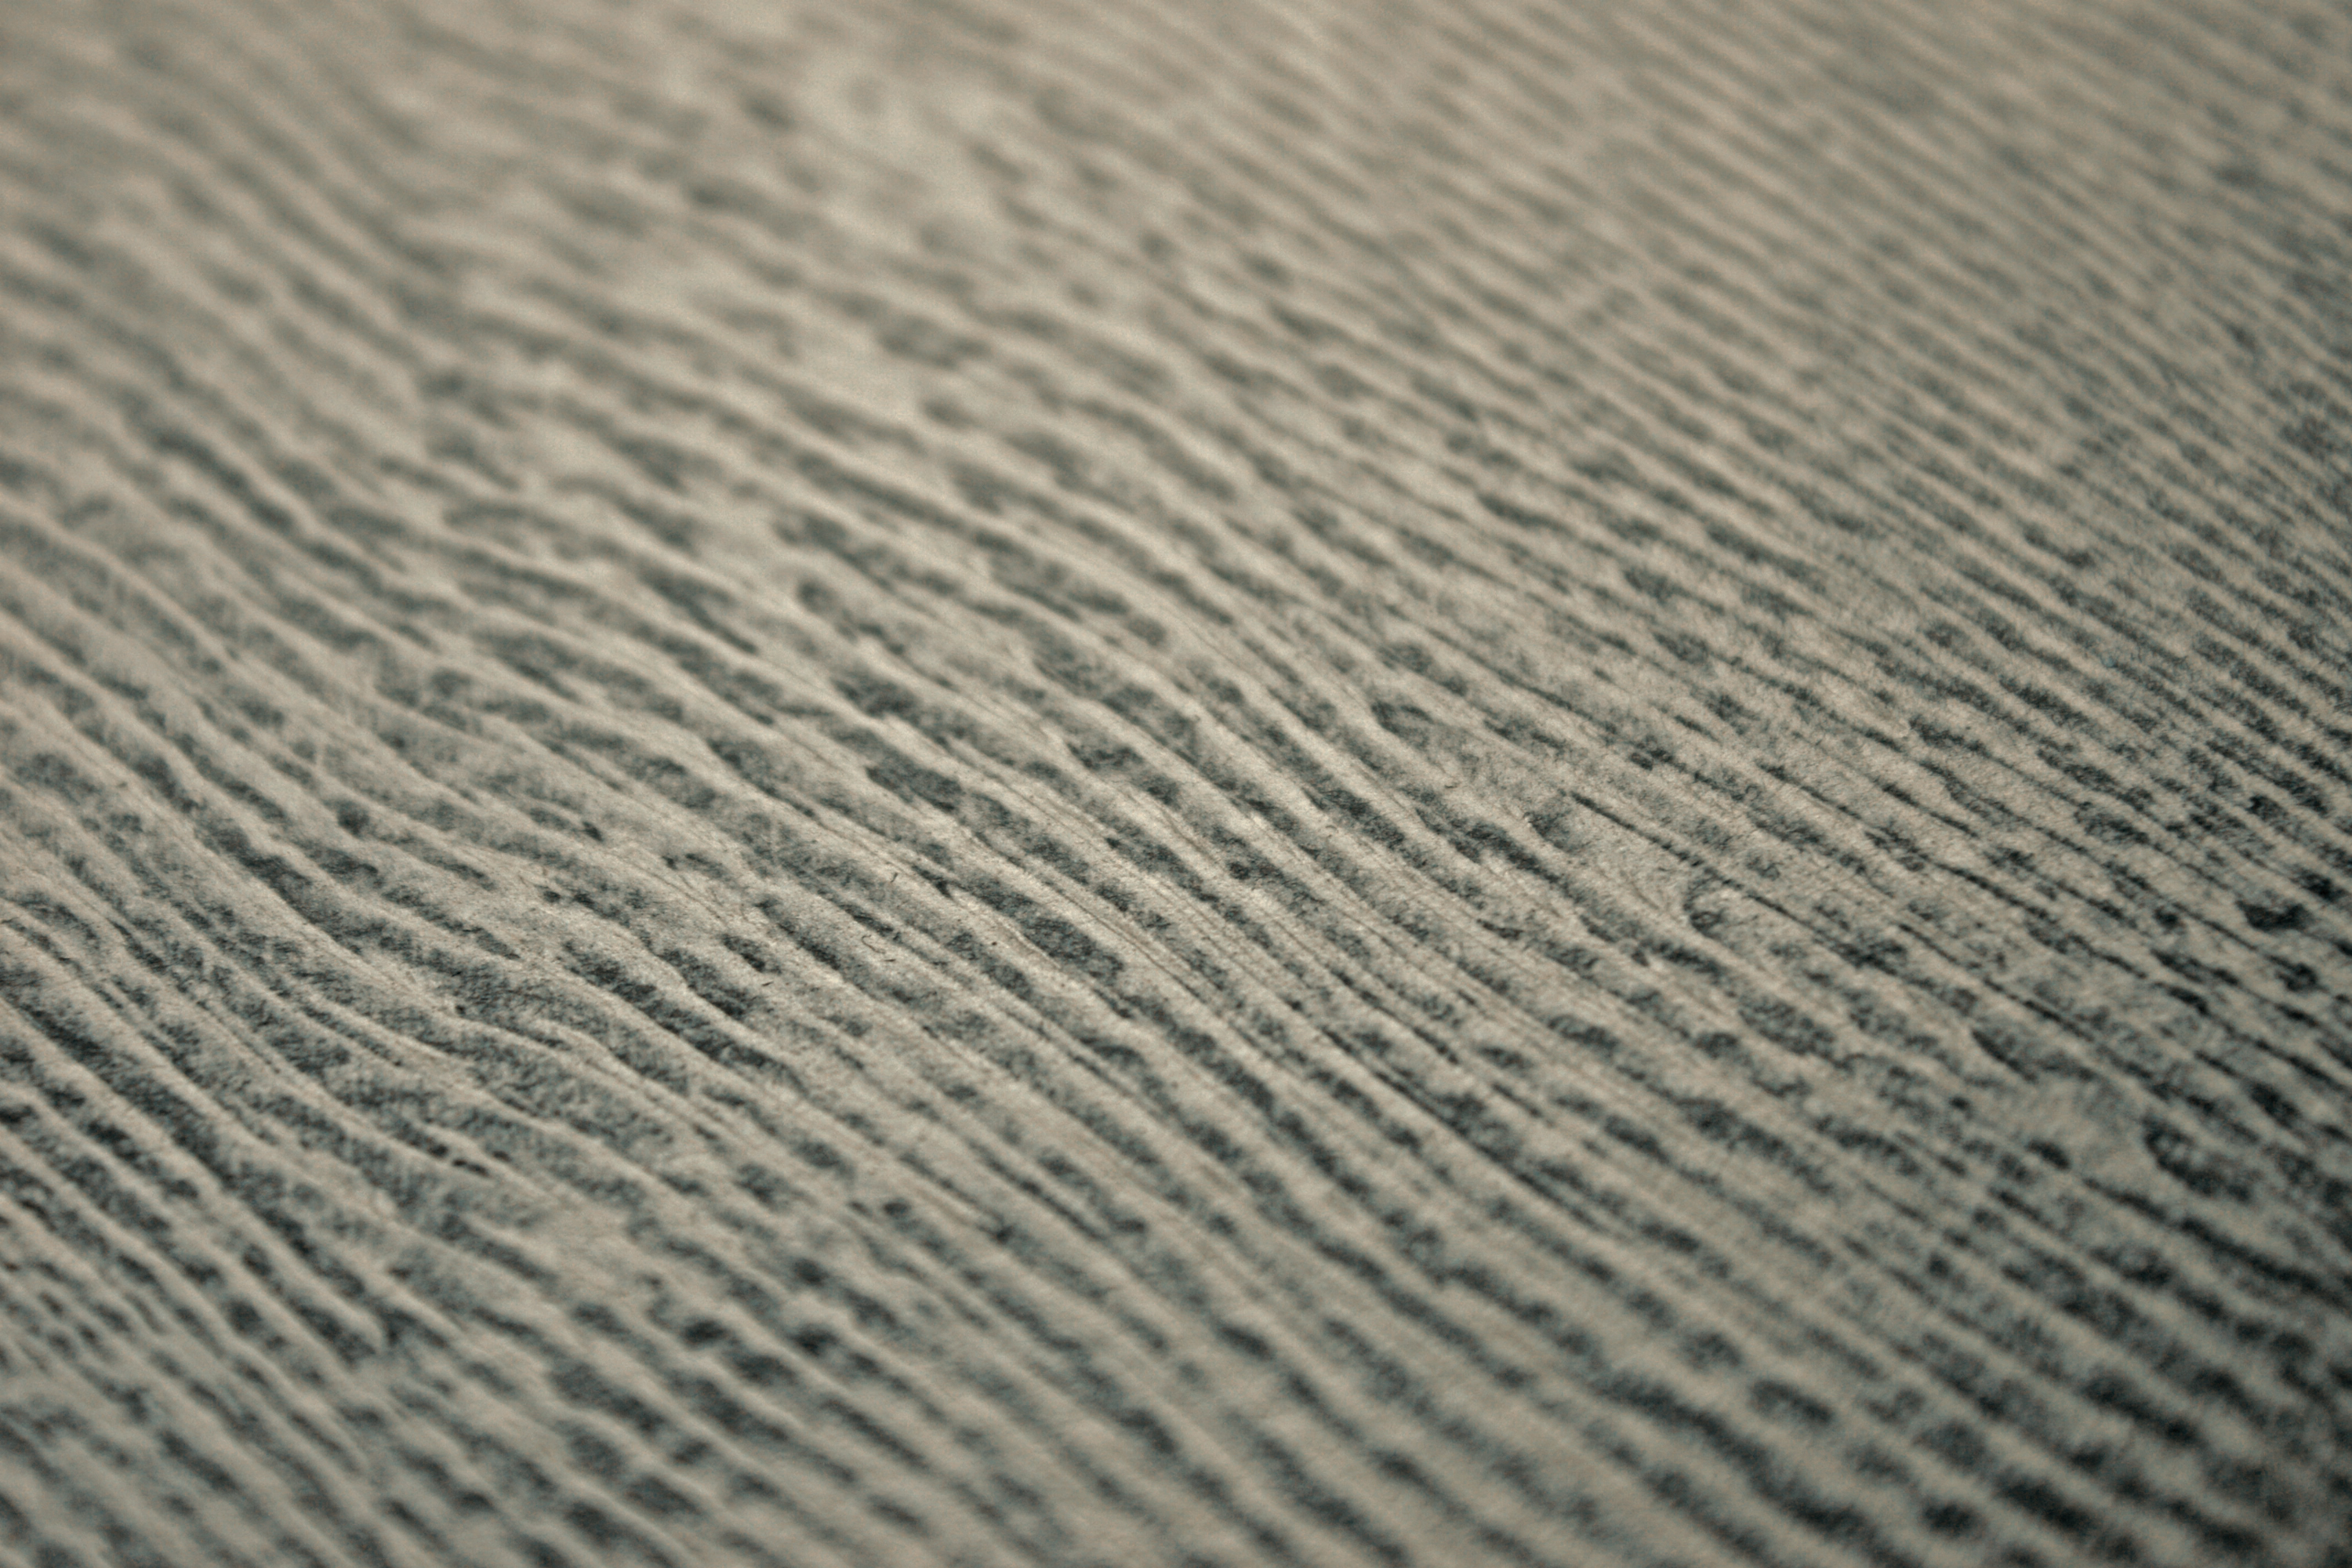 Detail of a wallpaper in an abstract ridged texture in mottled gray and black.